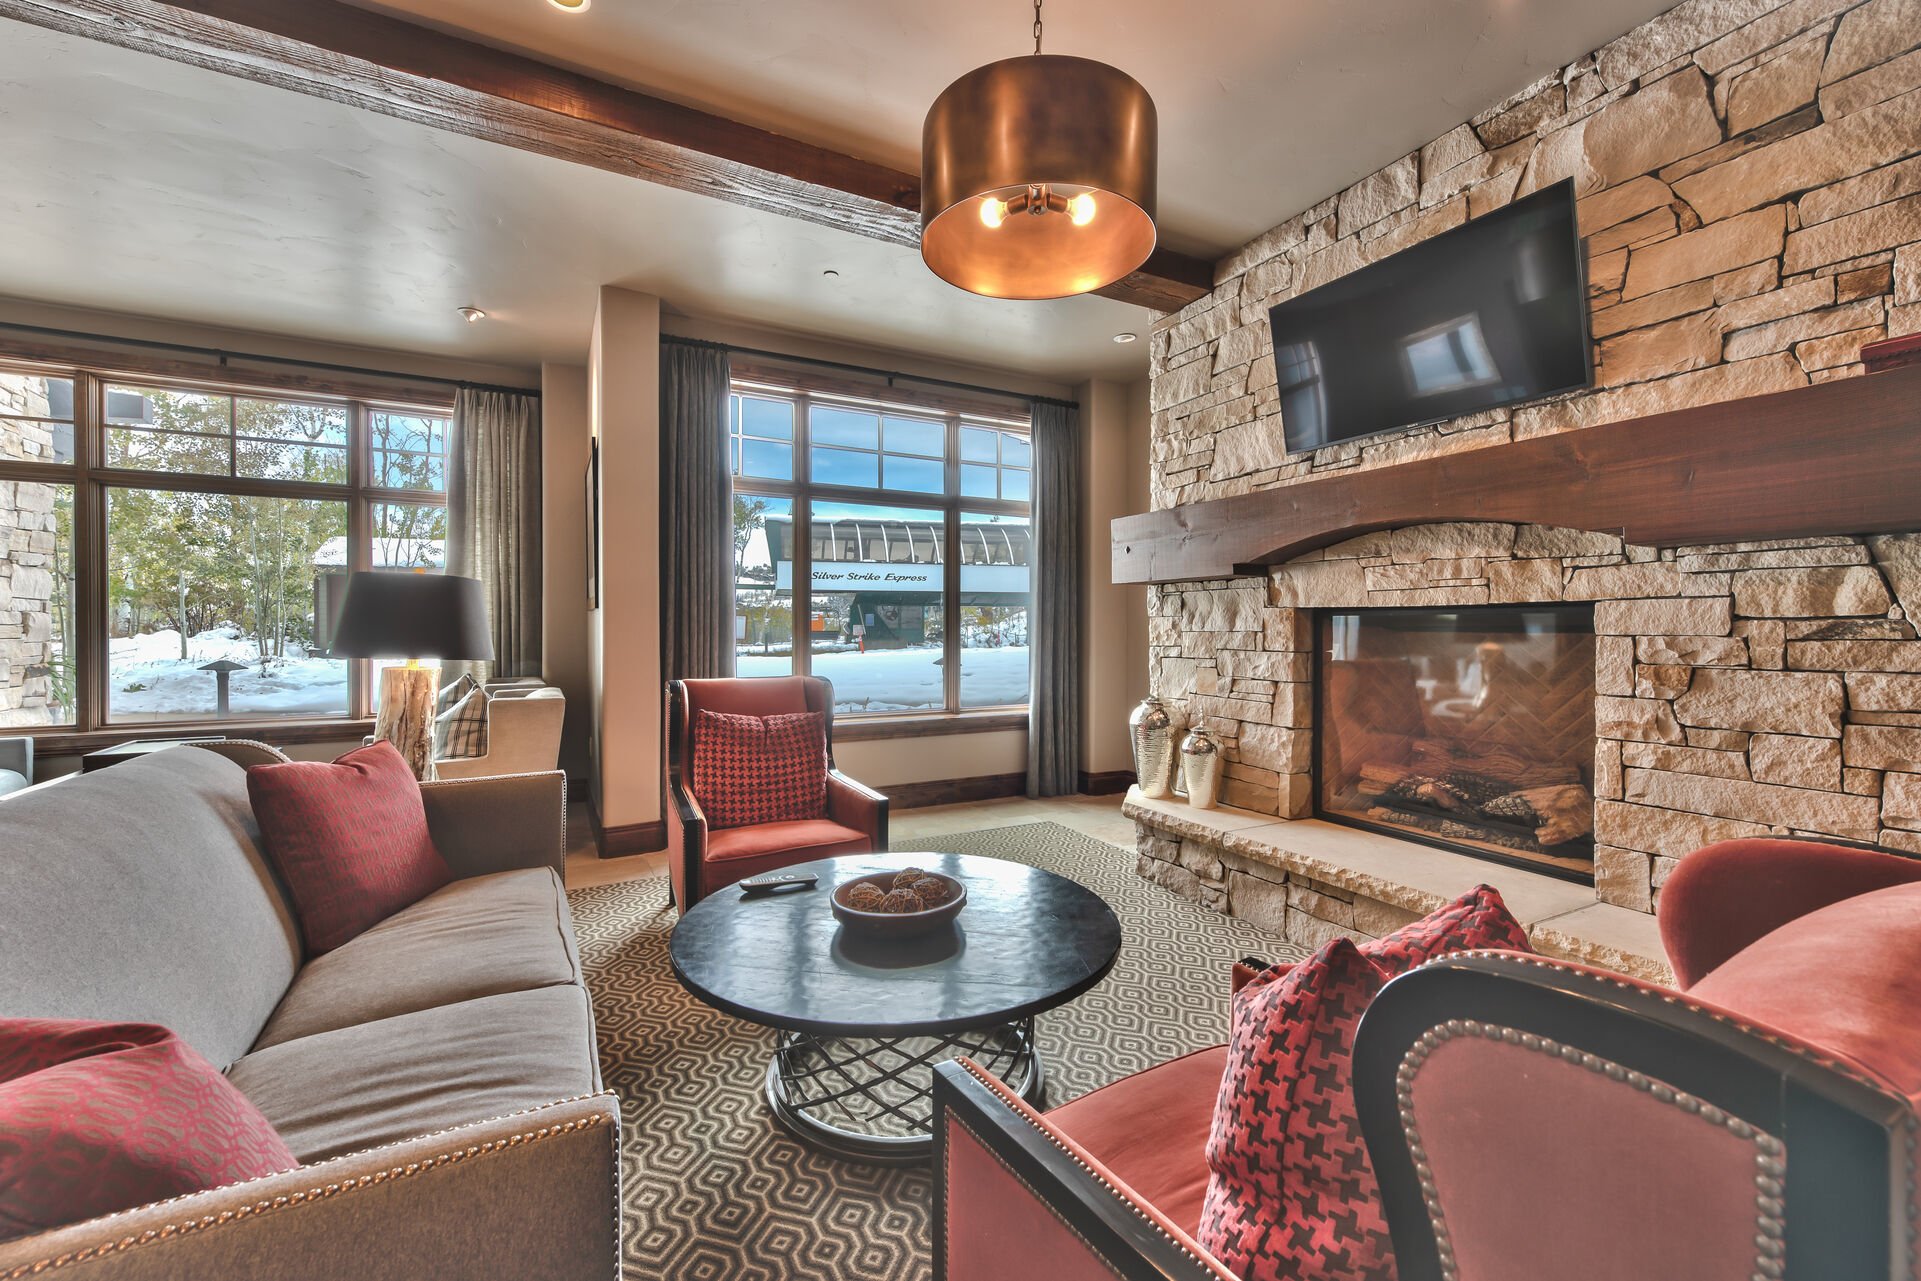 Owner/Guest Ski Lounge with Seating, TV, Gas Fireplace, Coffee and Tea